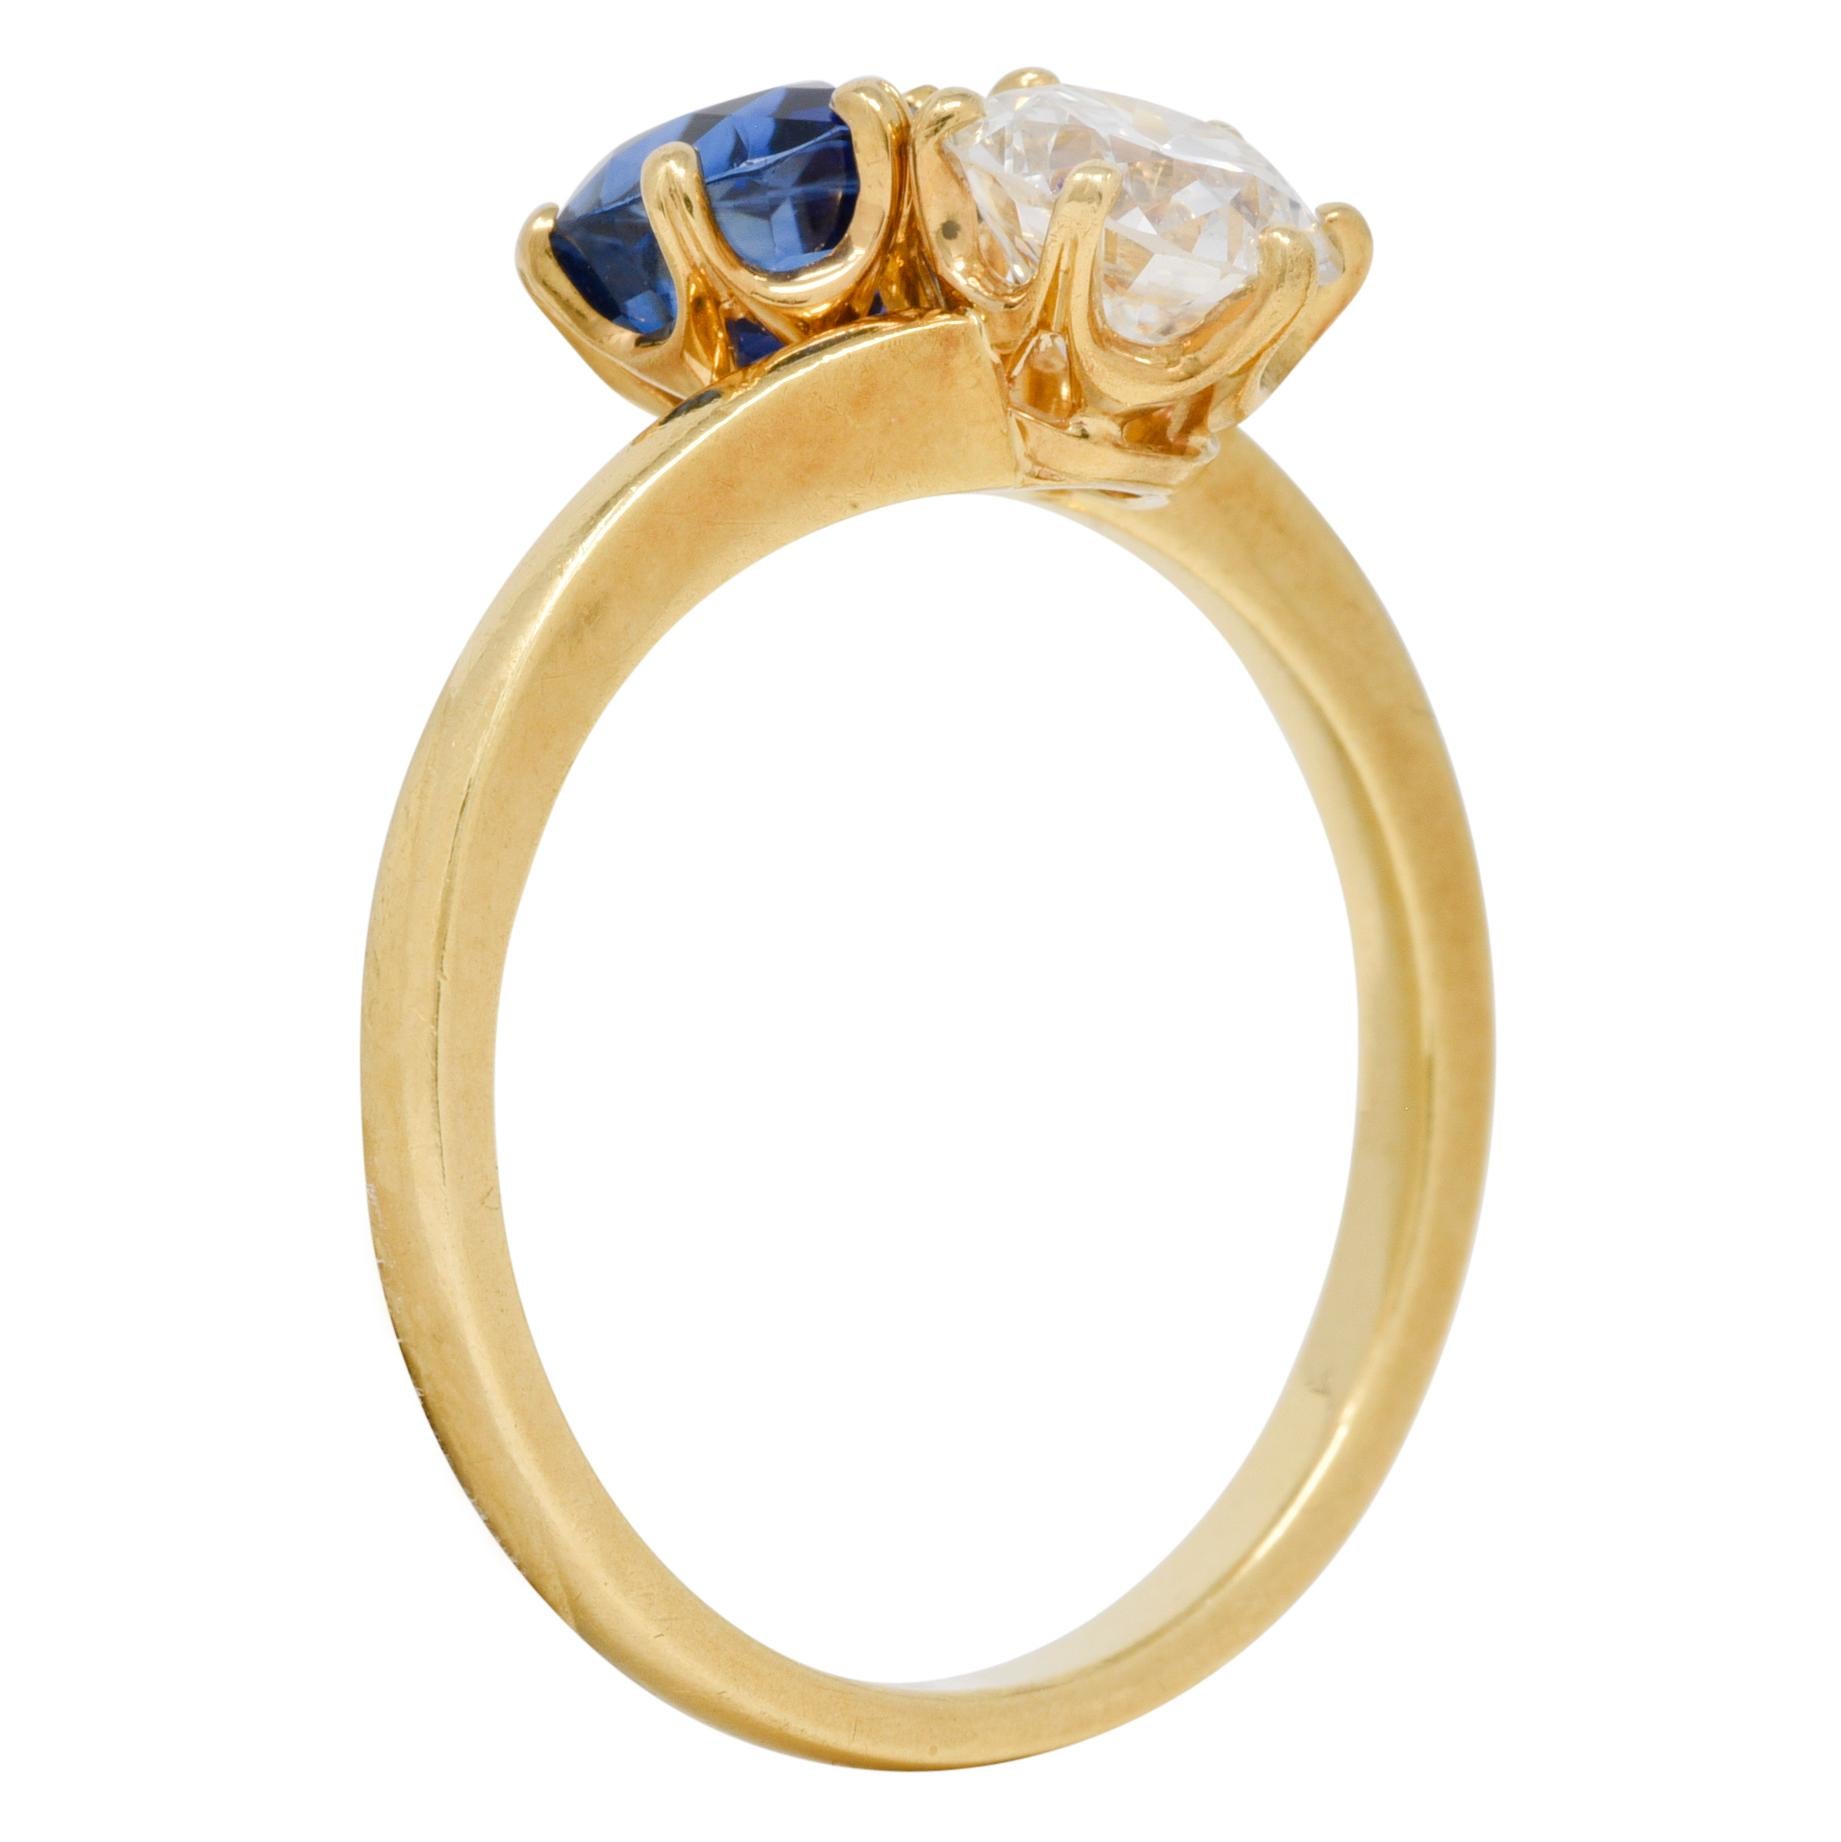 Designed as a toi-et-moi style bypass ring terminating with an old European cut diamond and a round cut sapphire
Diamond weighs approximately 0.82 carat - G color with VS2 clarity
Sapphire weighs approximately 1.22 carat total - transparent medium